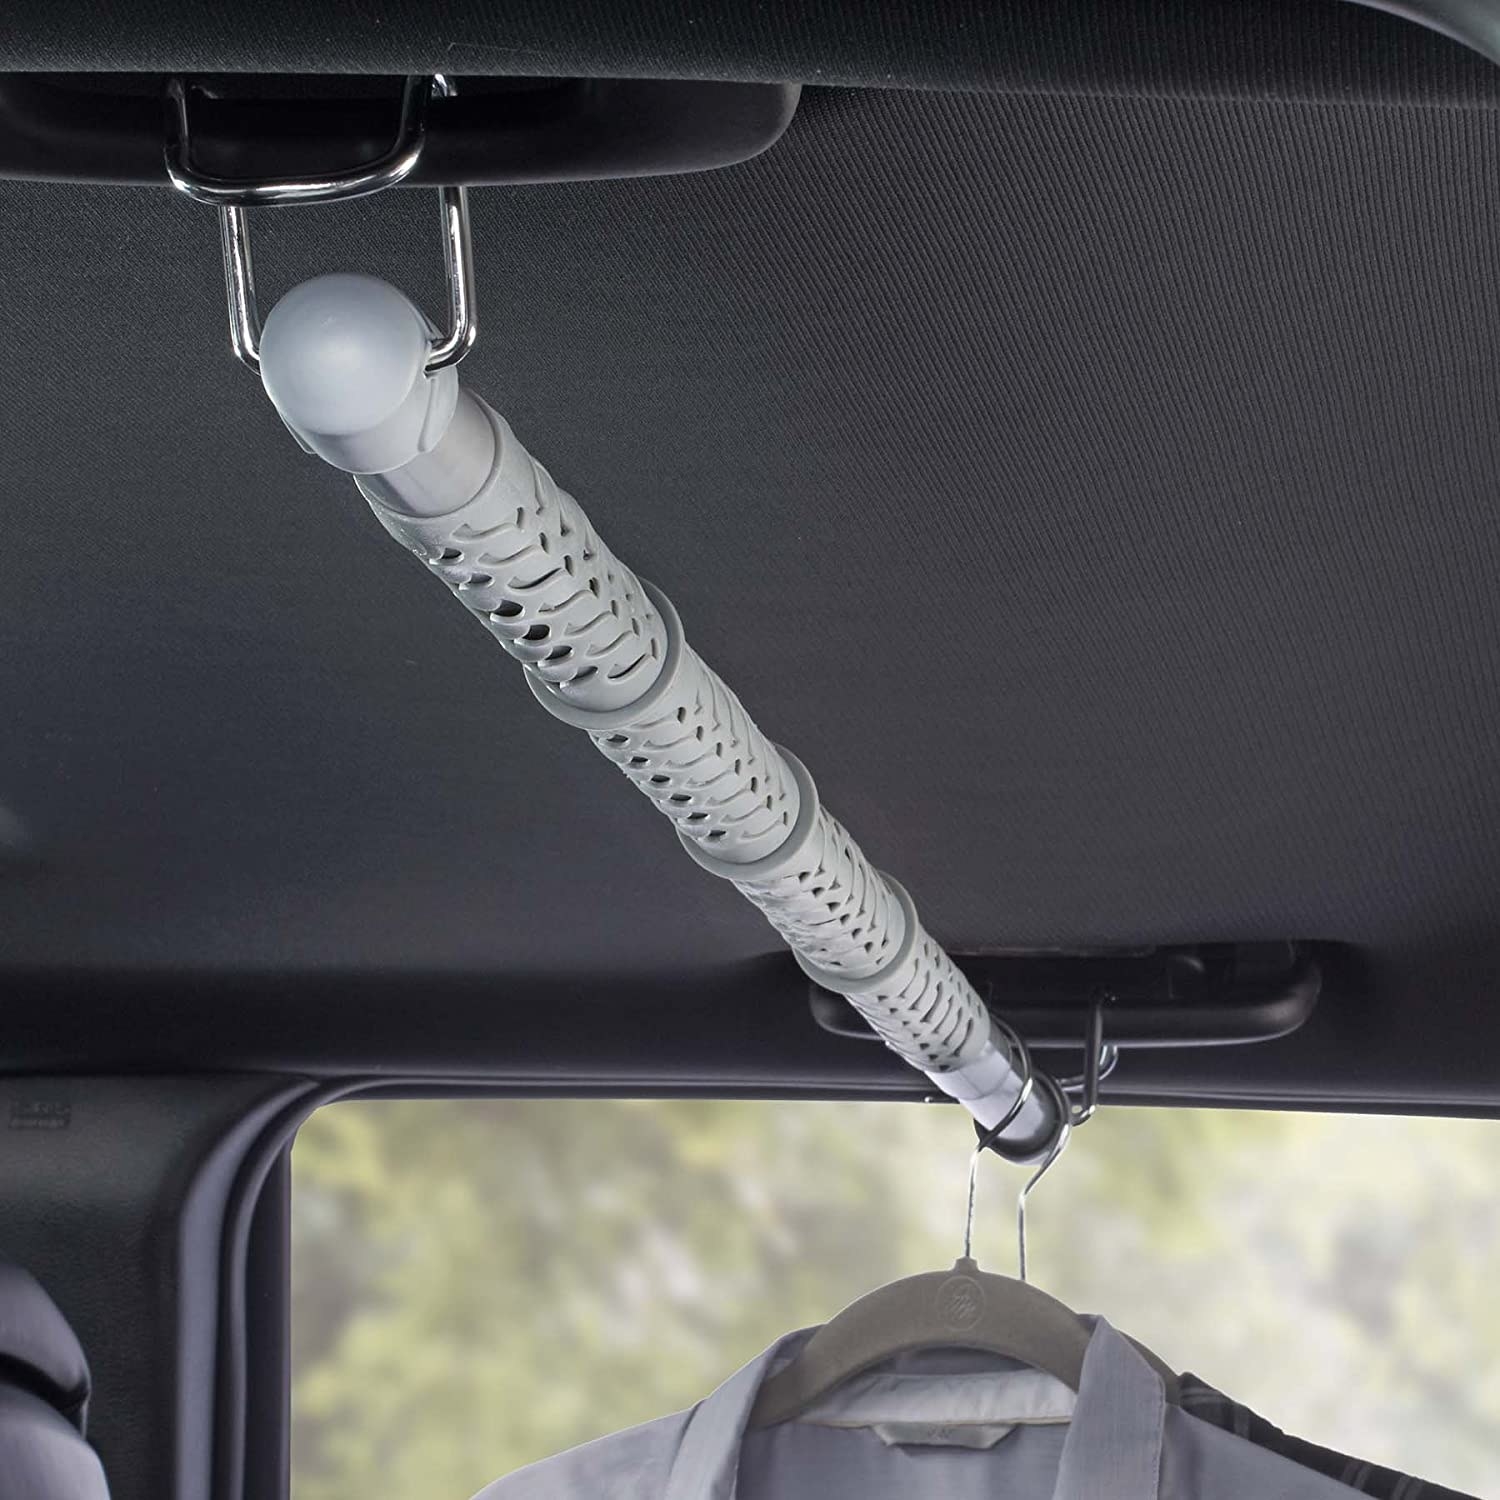 The hanging rod hung across the car, connected to the handles on both sides